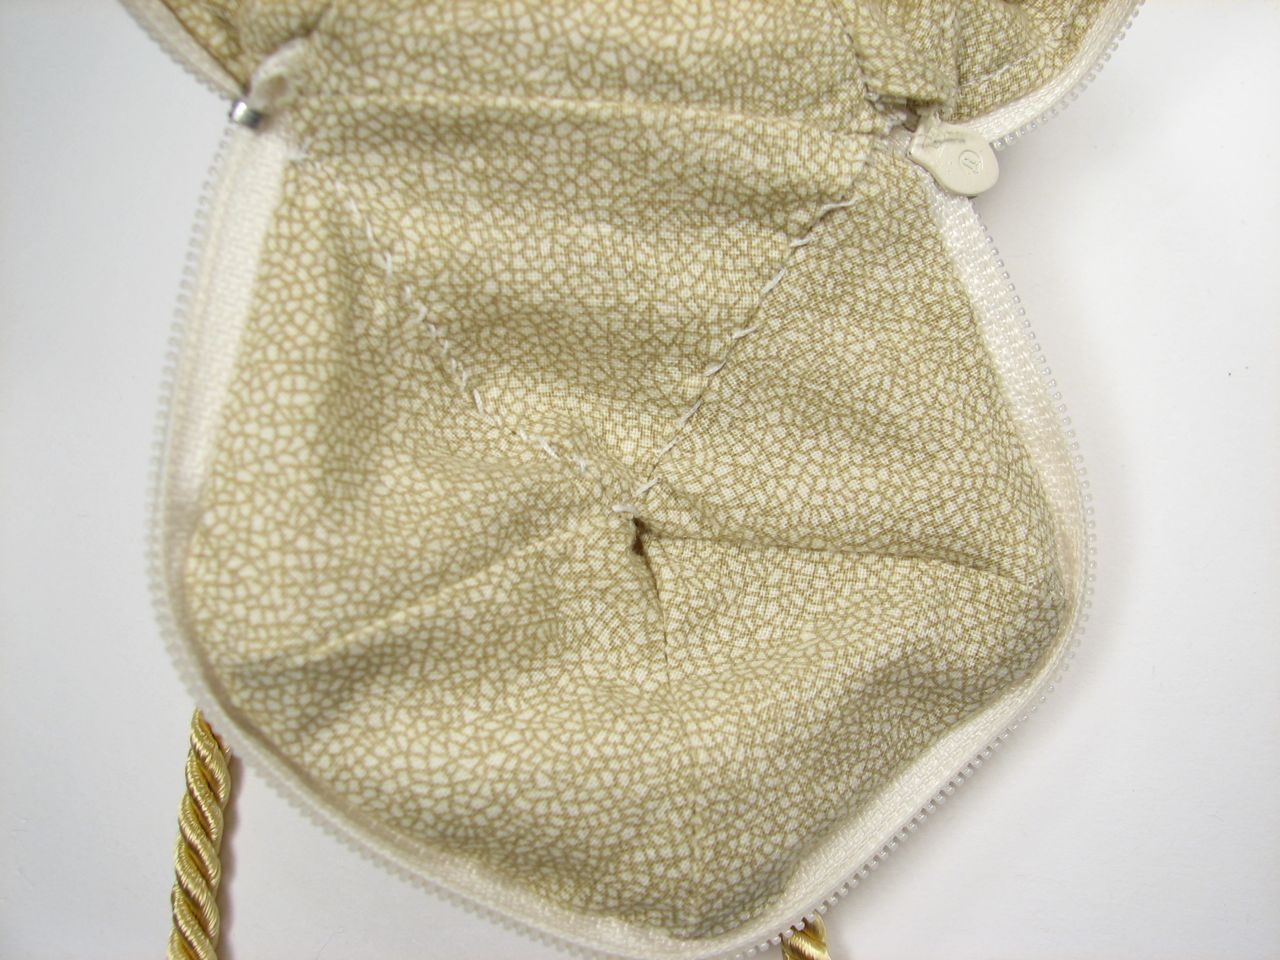 a white bag with an animal print design on the inside